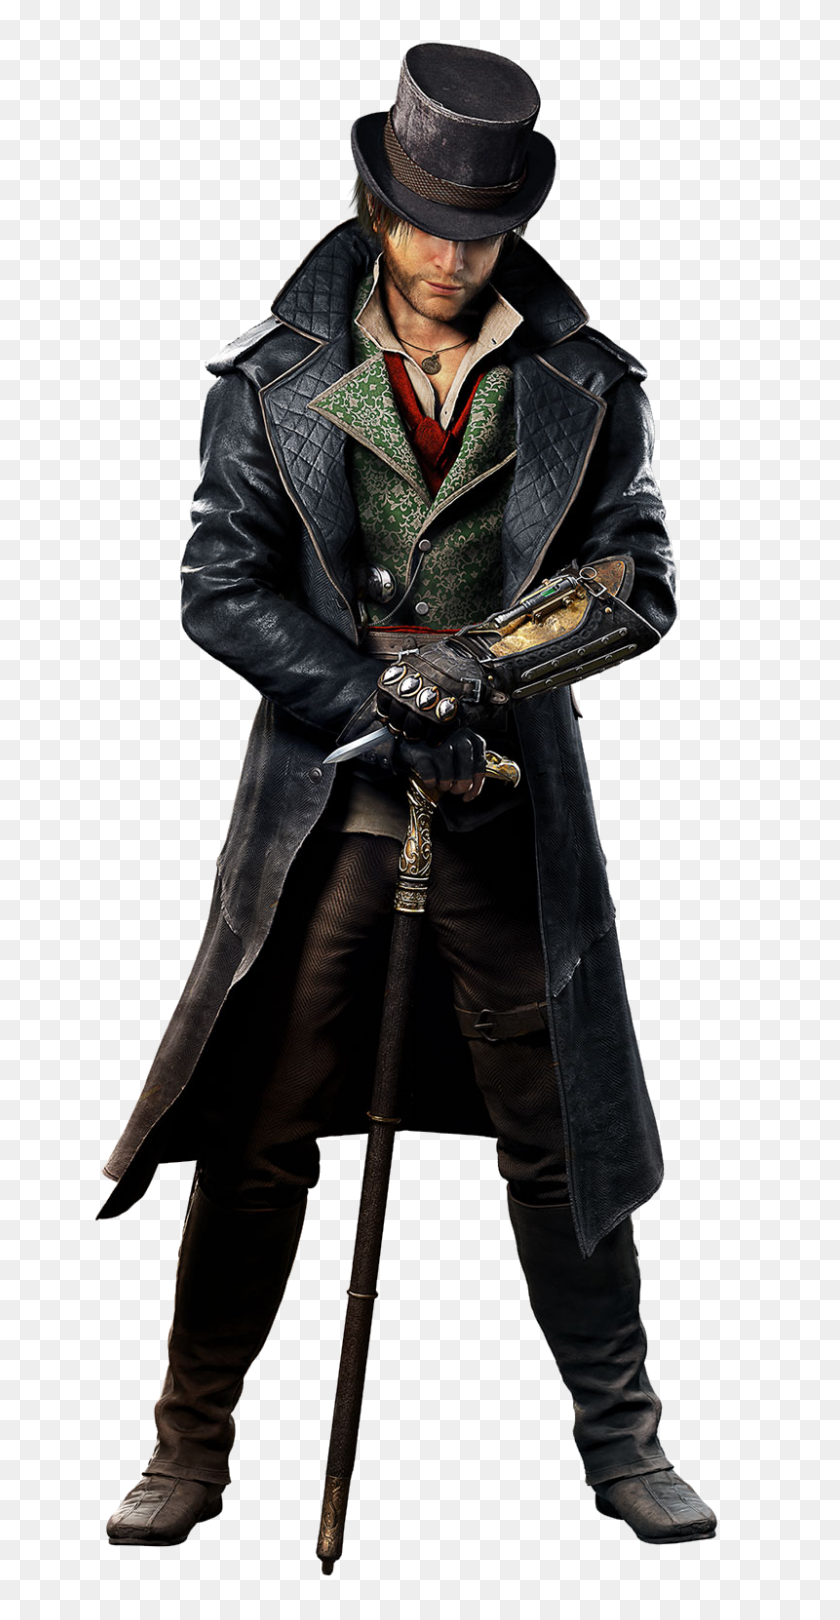 800x1600 Assassin Creed Syndicate Png Прозрачный Assassin Creed Syndicate - Assassins Creed Png